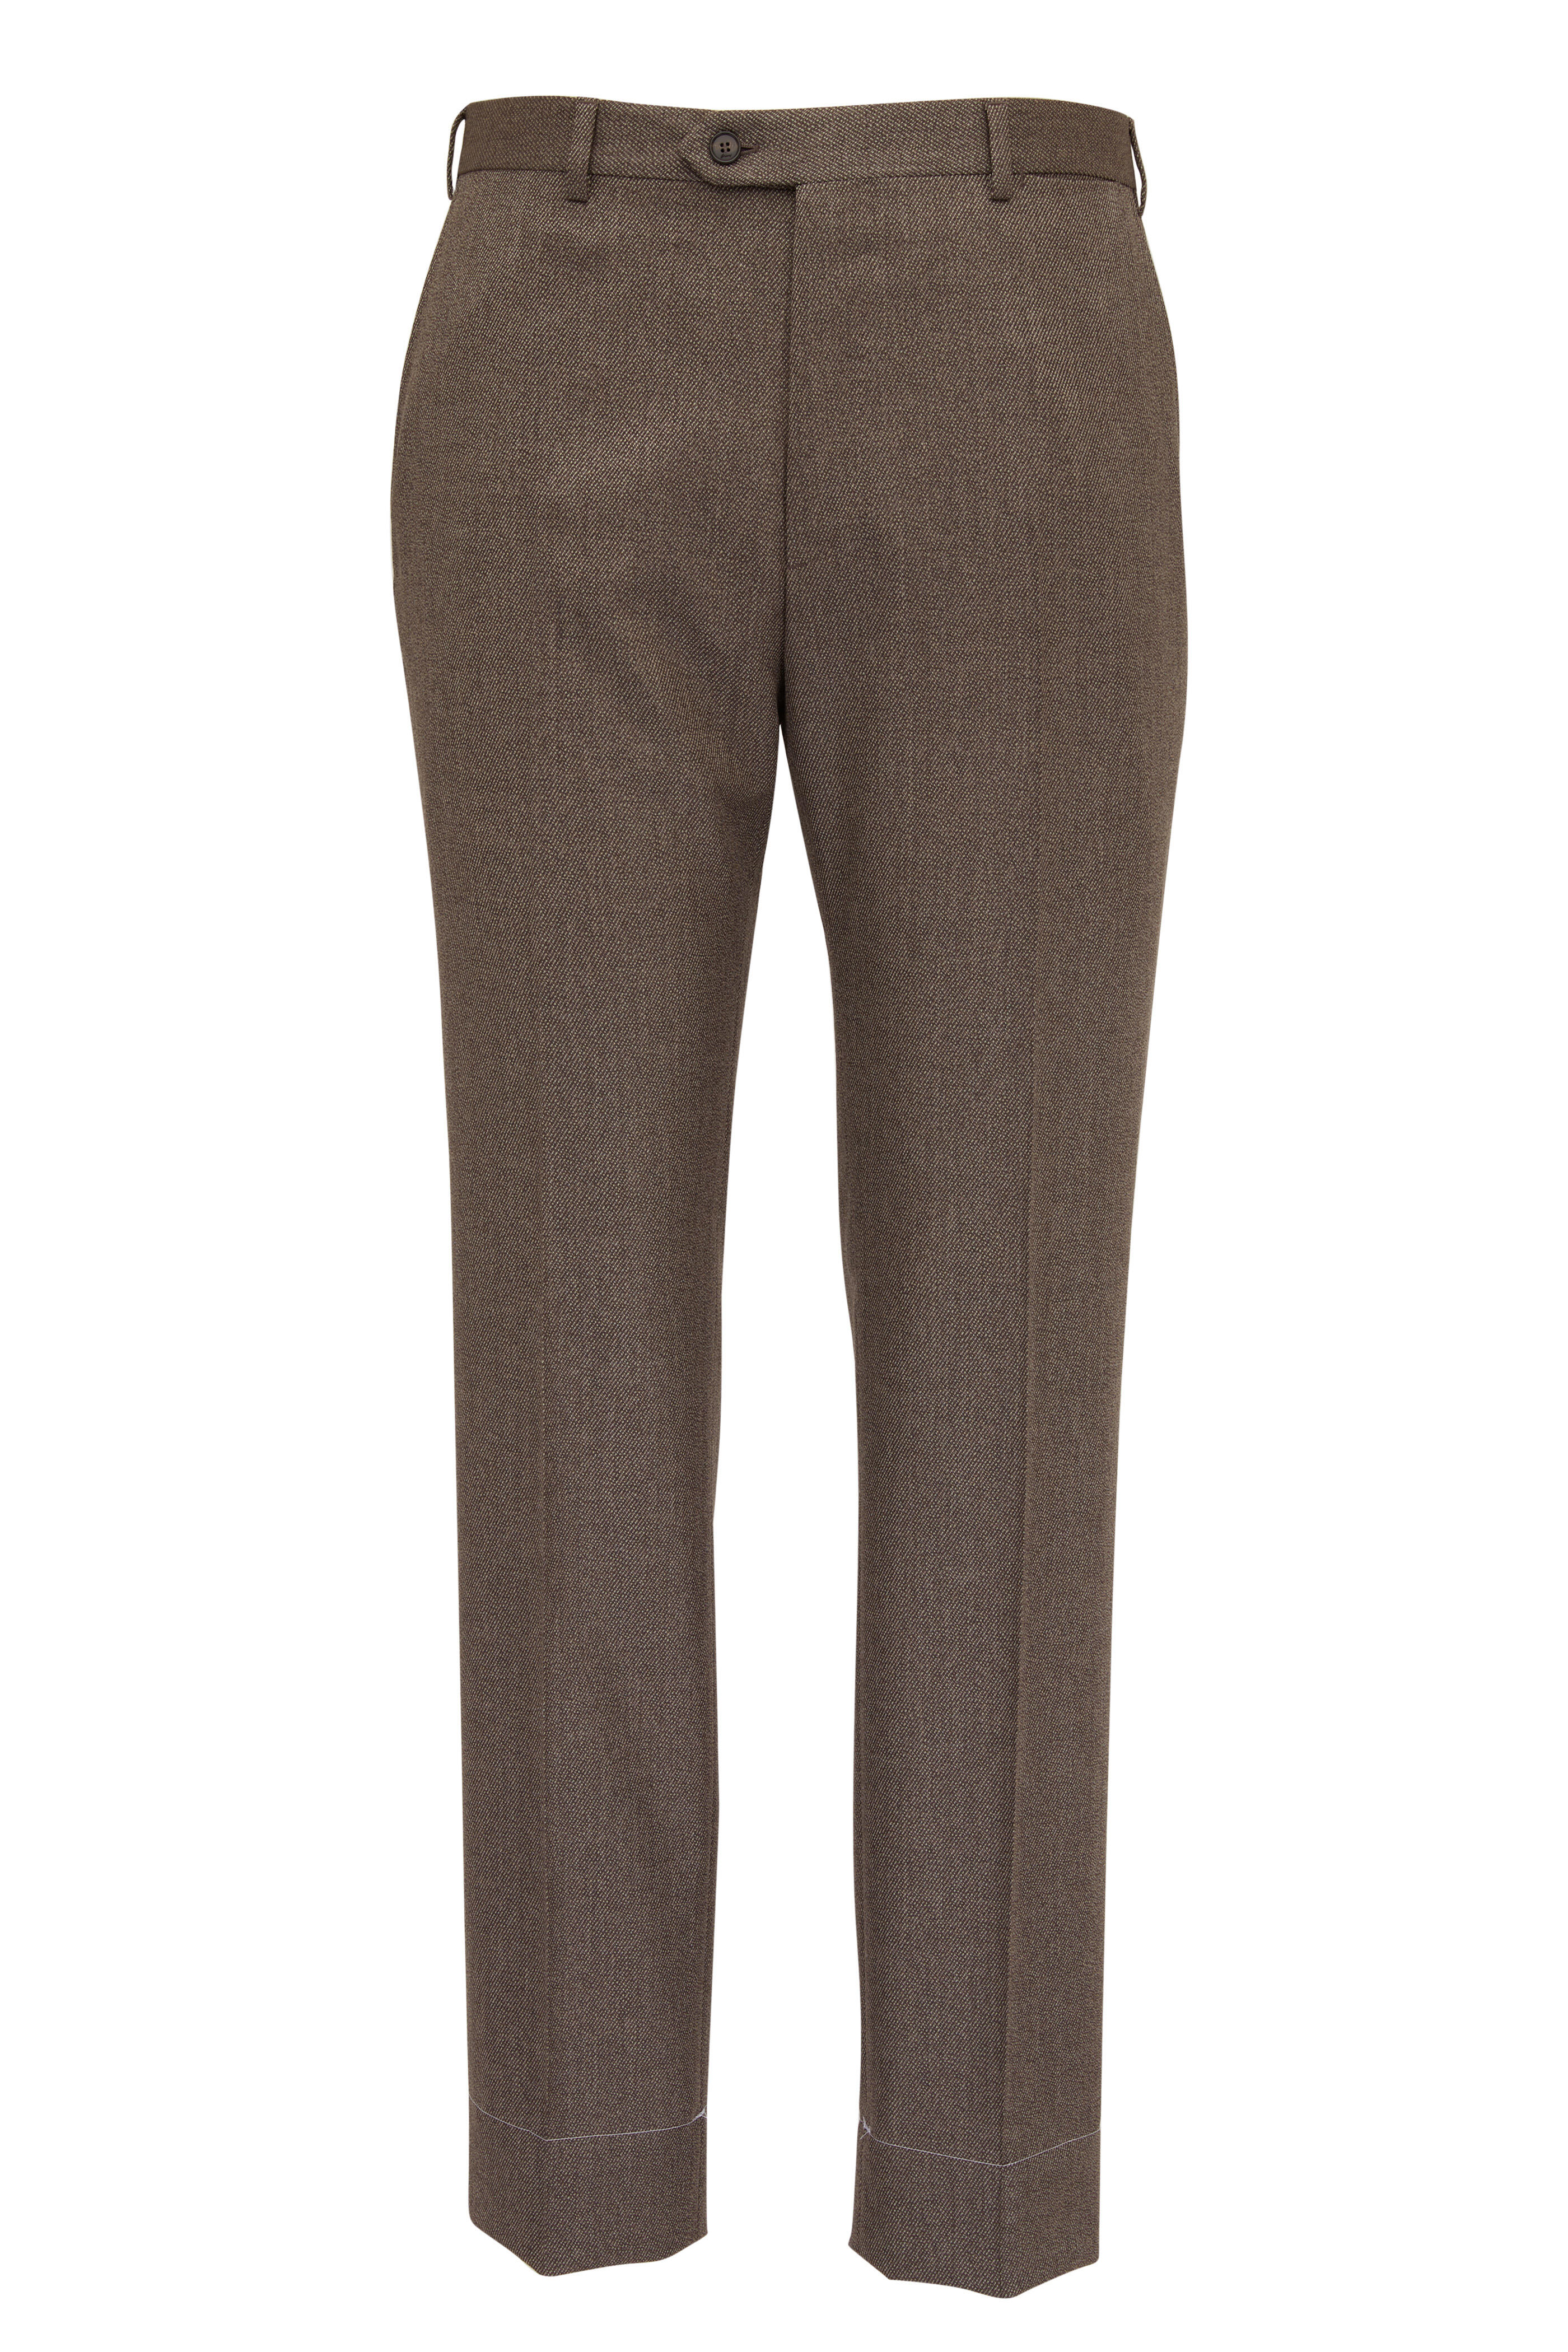 Brioni - Solid Tan Wool Dress Pant | Mitchell Stores